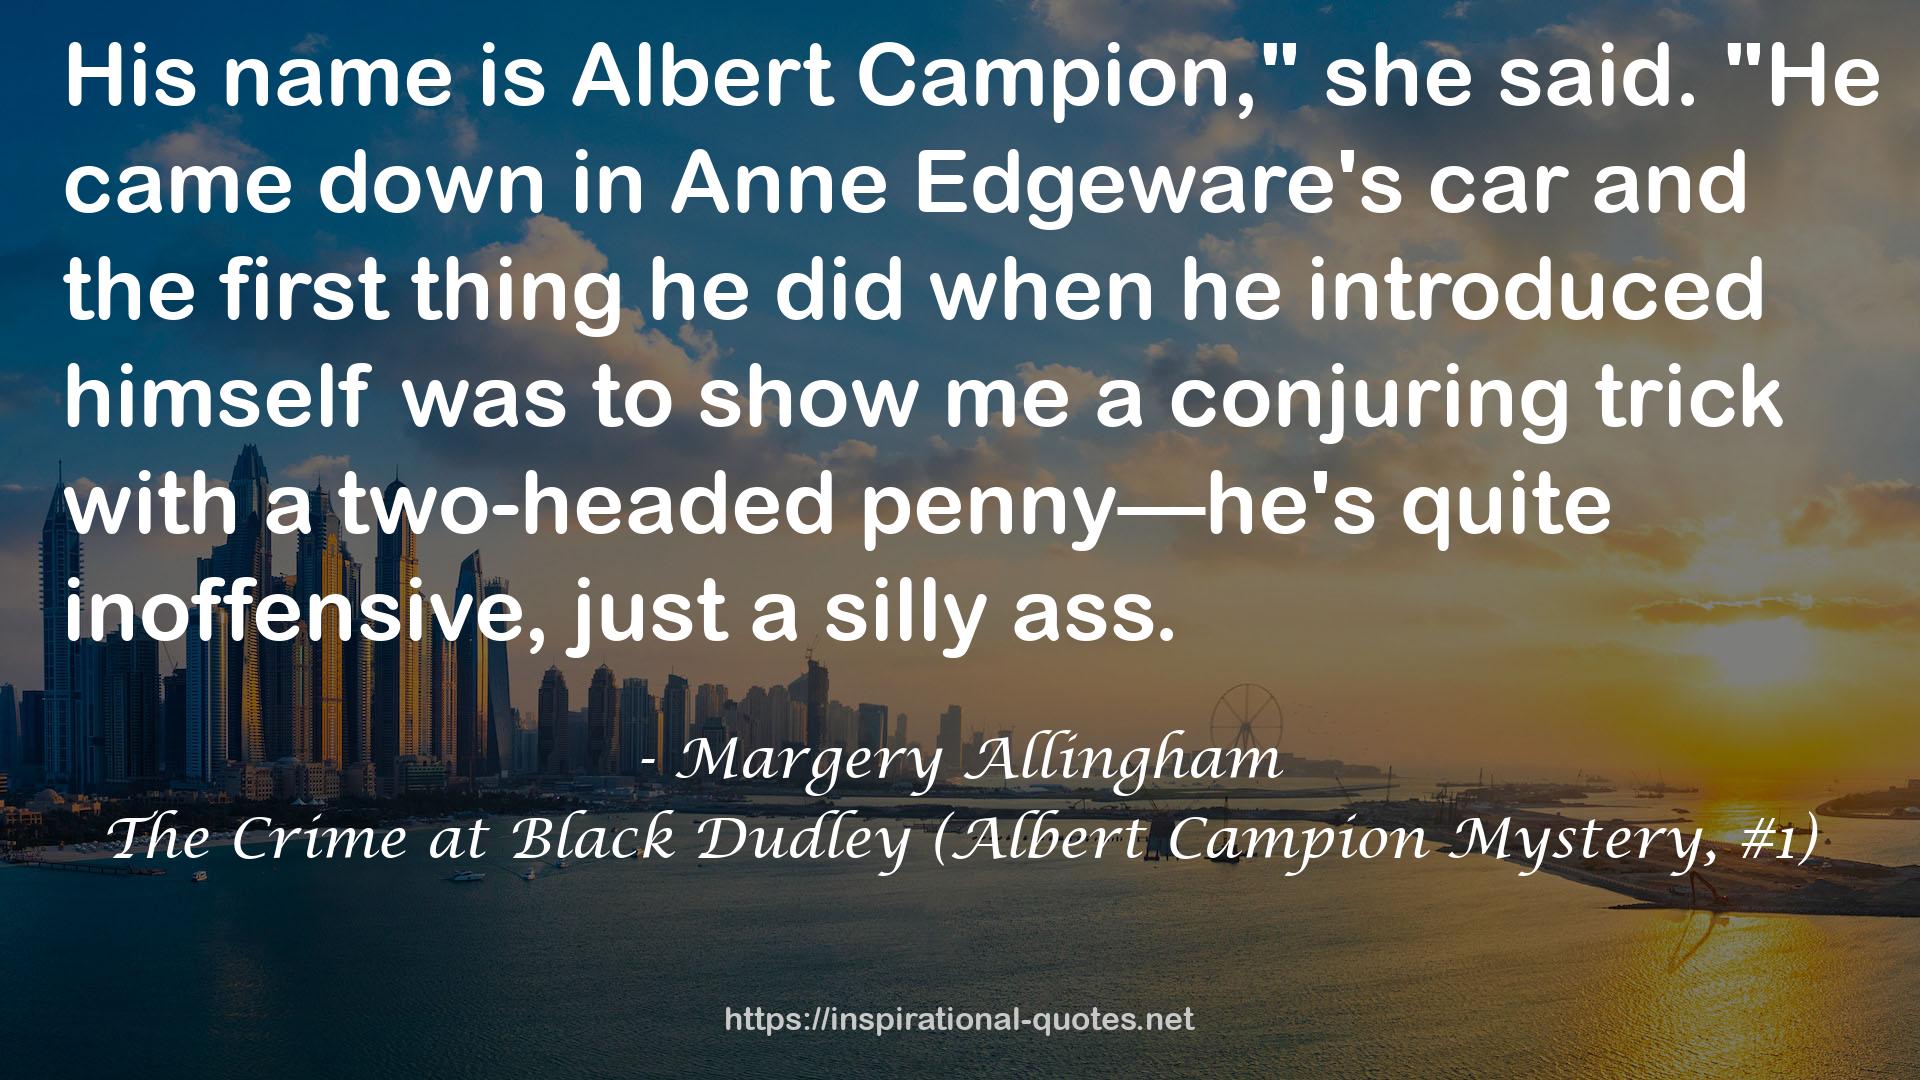 Margery Allingham QUOTES